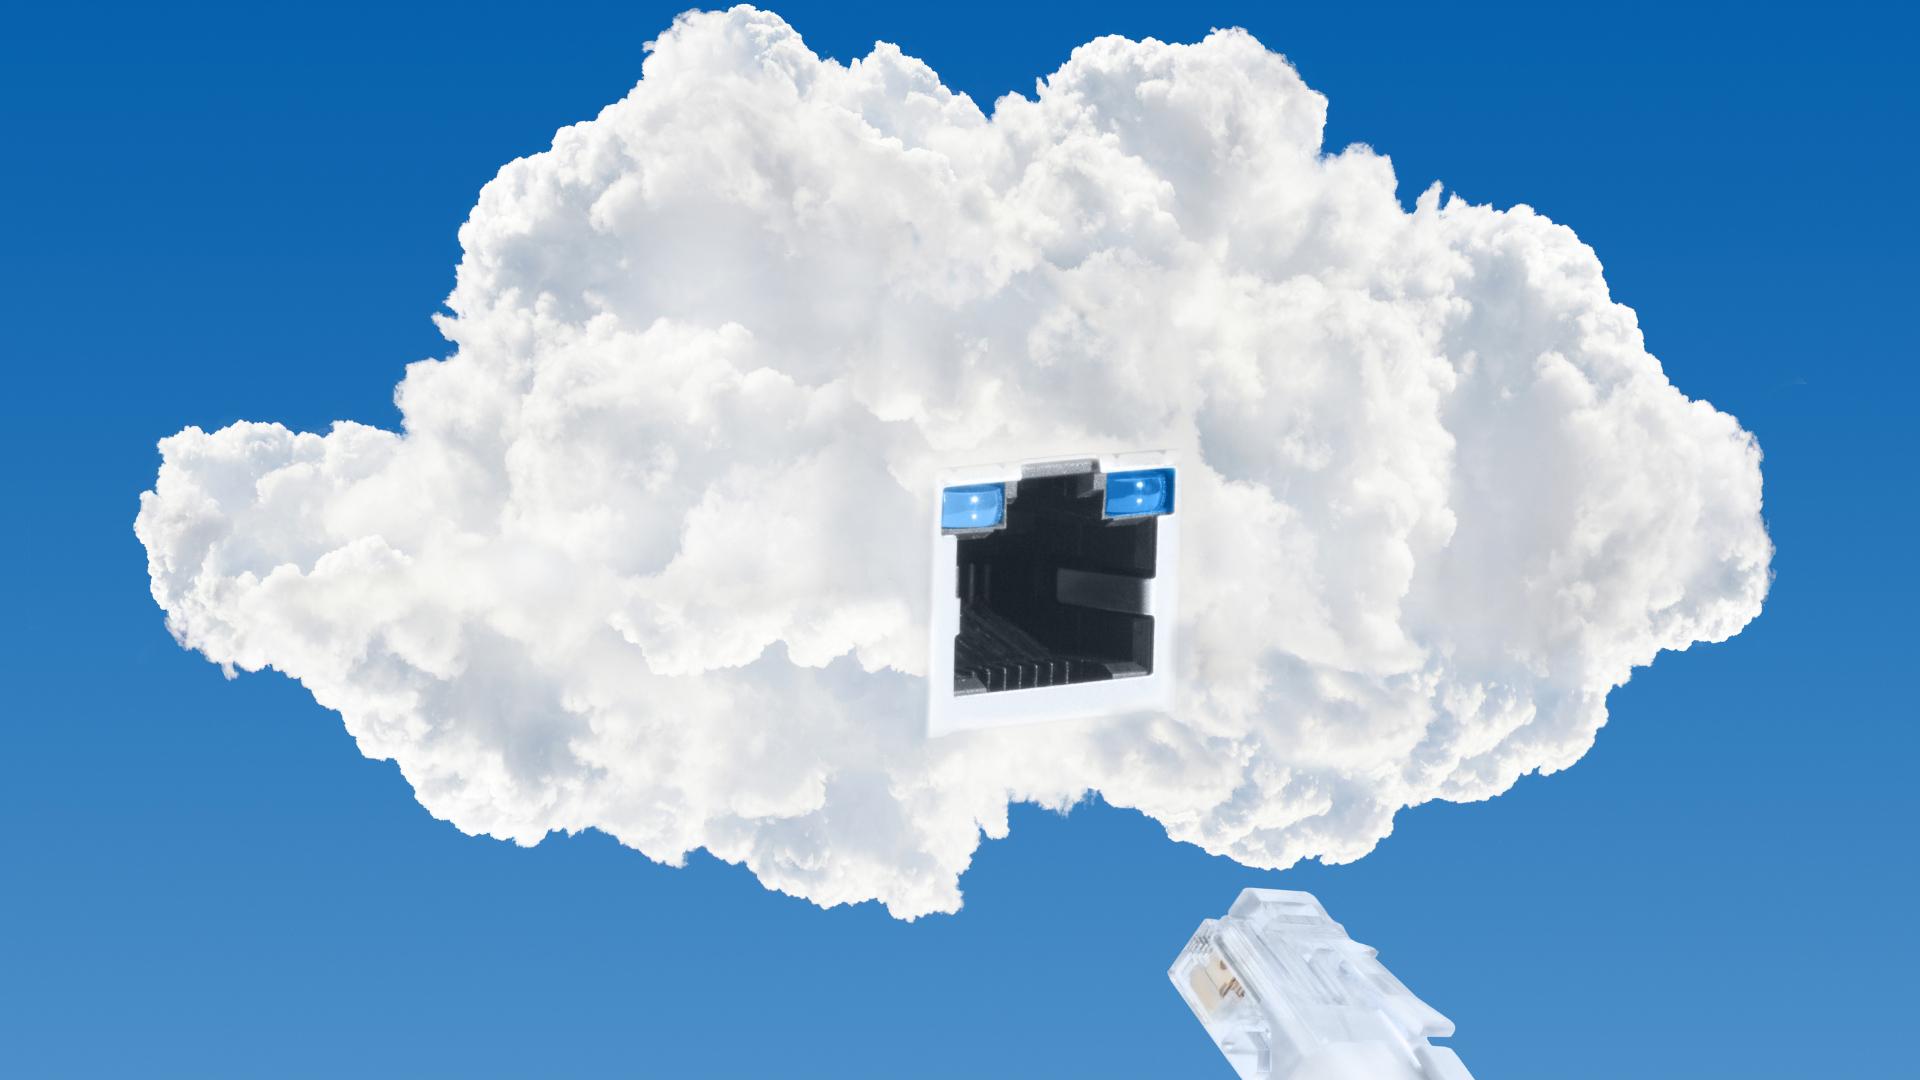 cloud with ethernet plug to symbolize cloud-based software